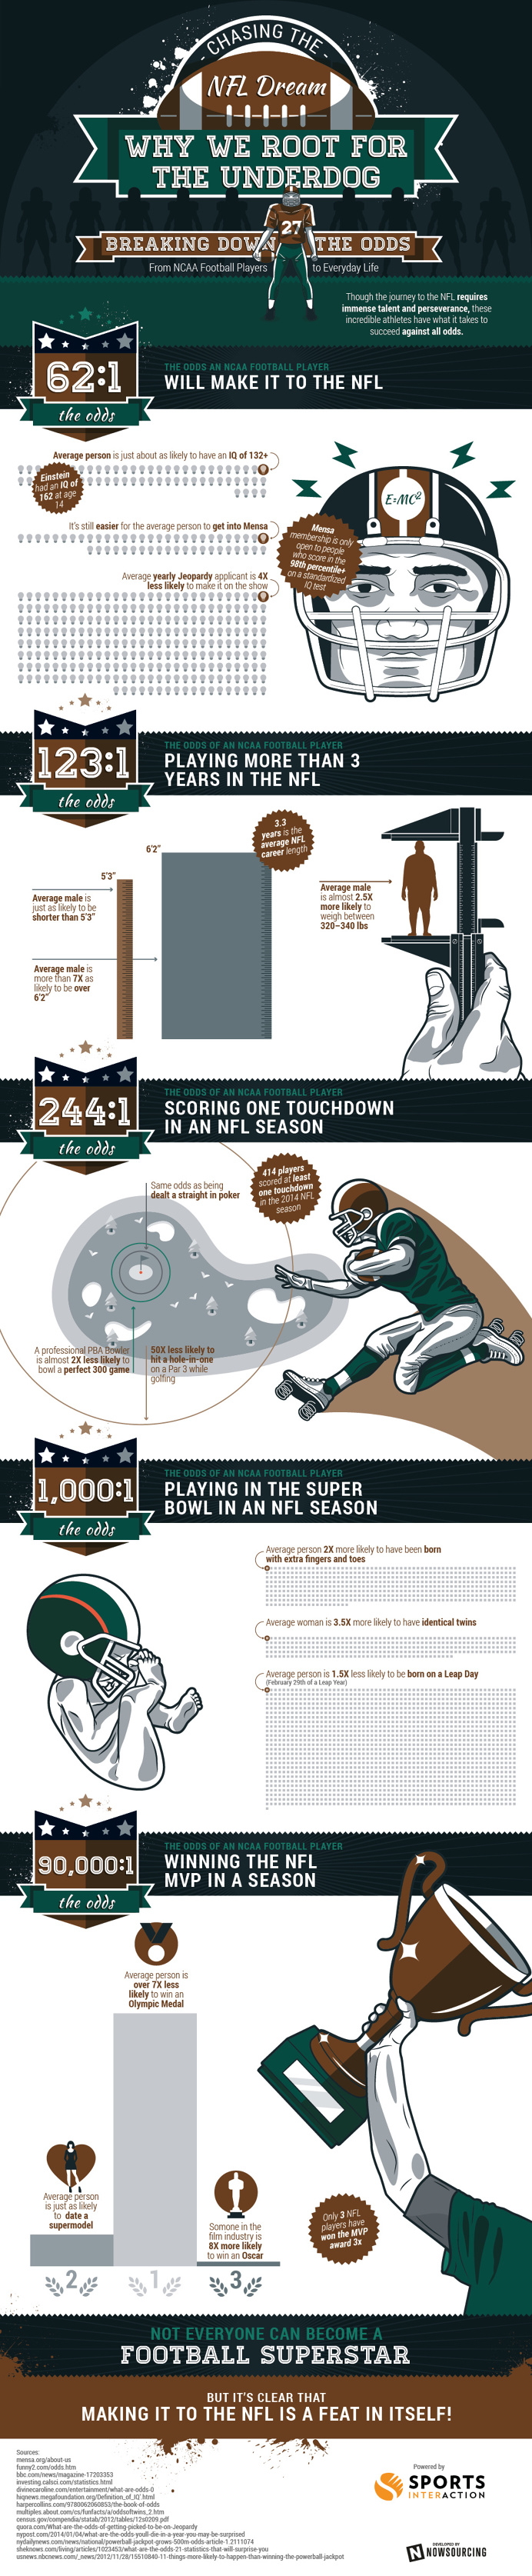 What are your #odds of making it to the #NFL? Learn more from this infographic!